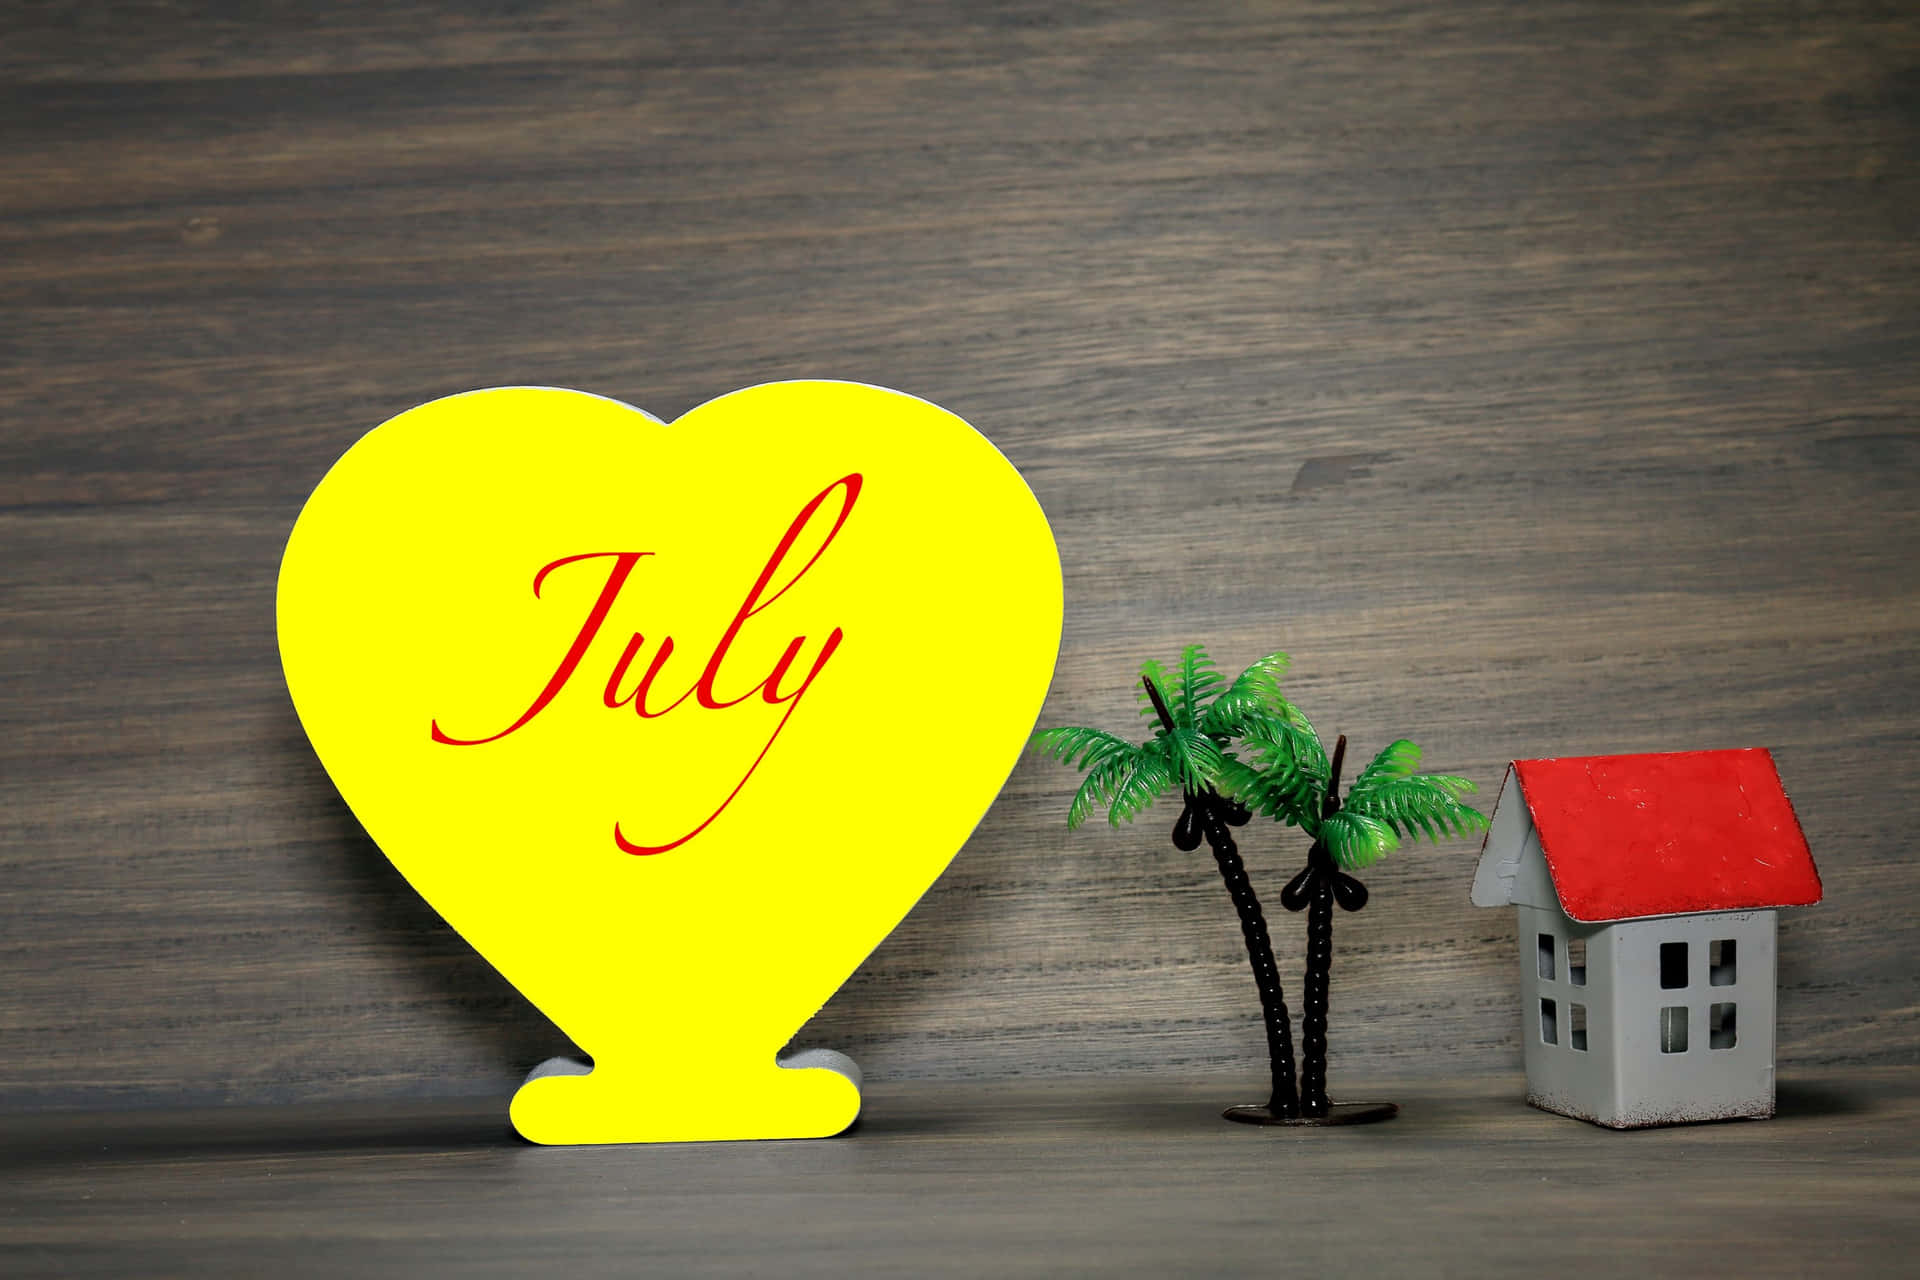 July Love Homeand Palm Tree Wallpaper